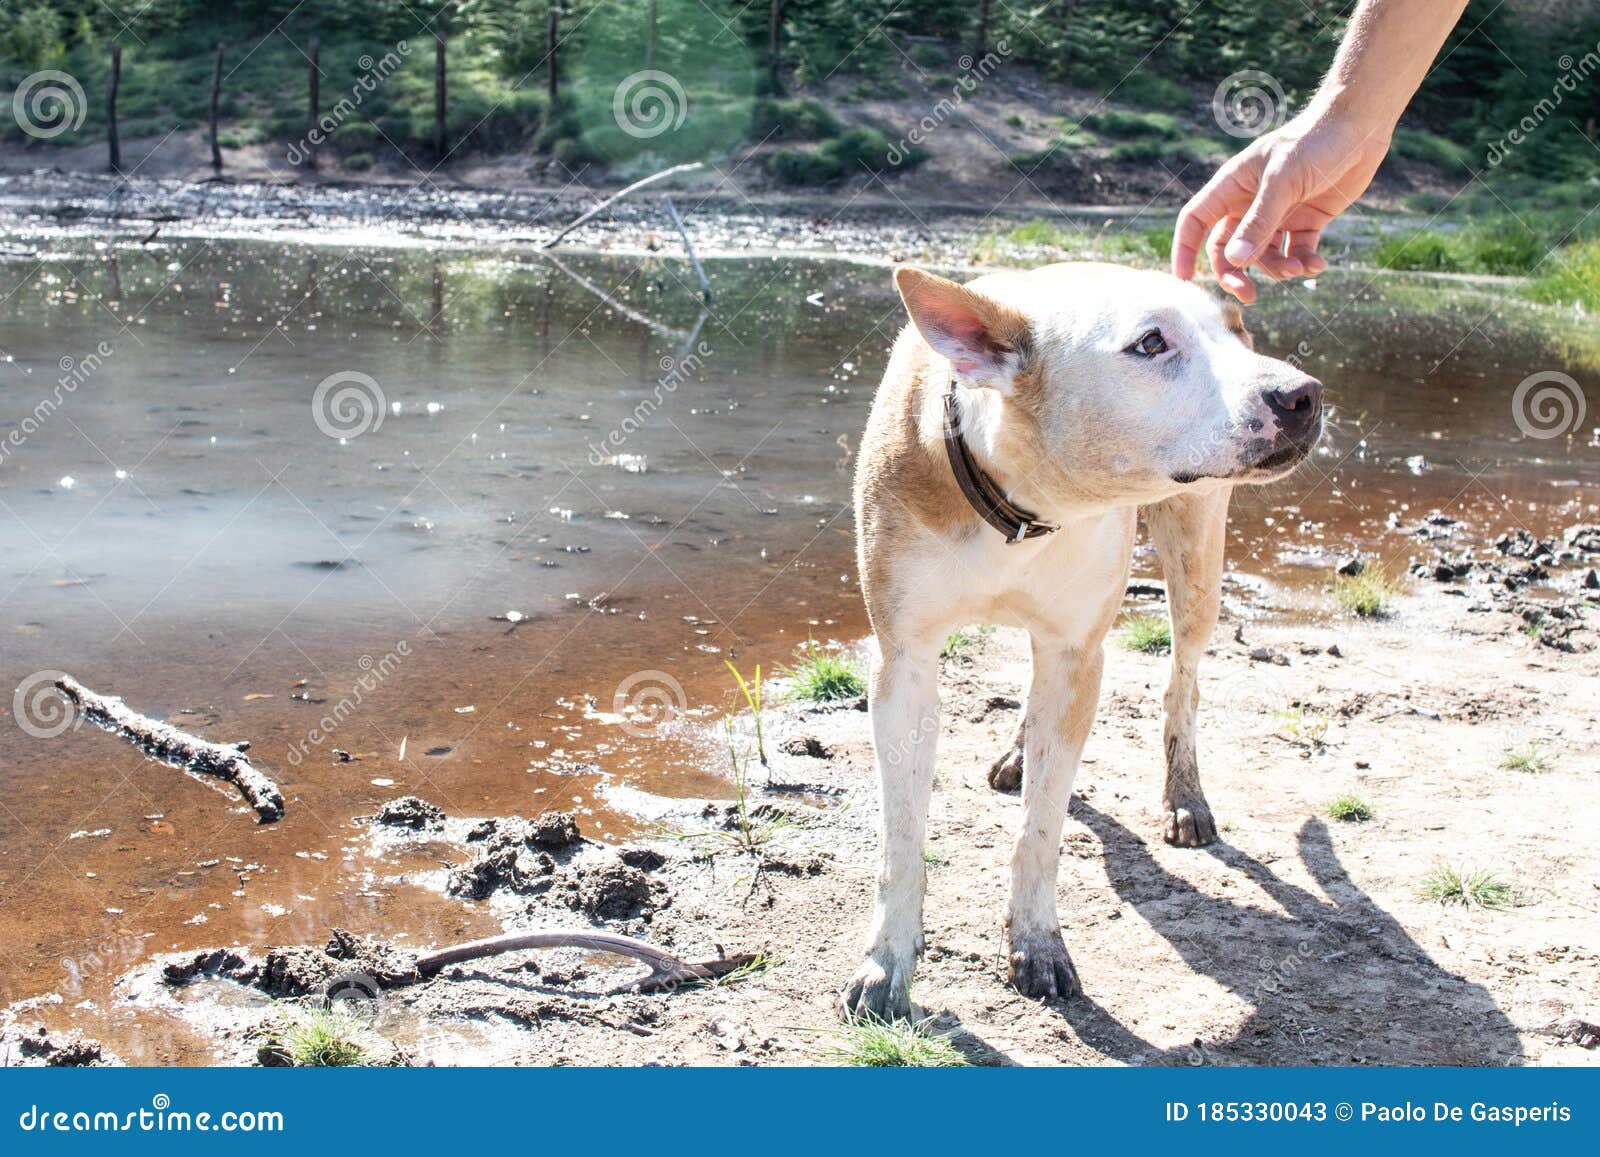 Pit Bull Dog And Master Near A Puddle Of Water During An ...